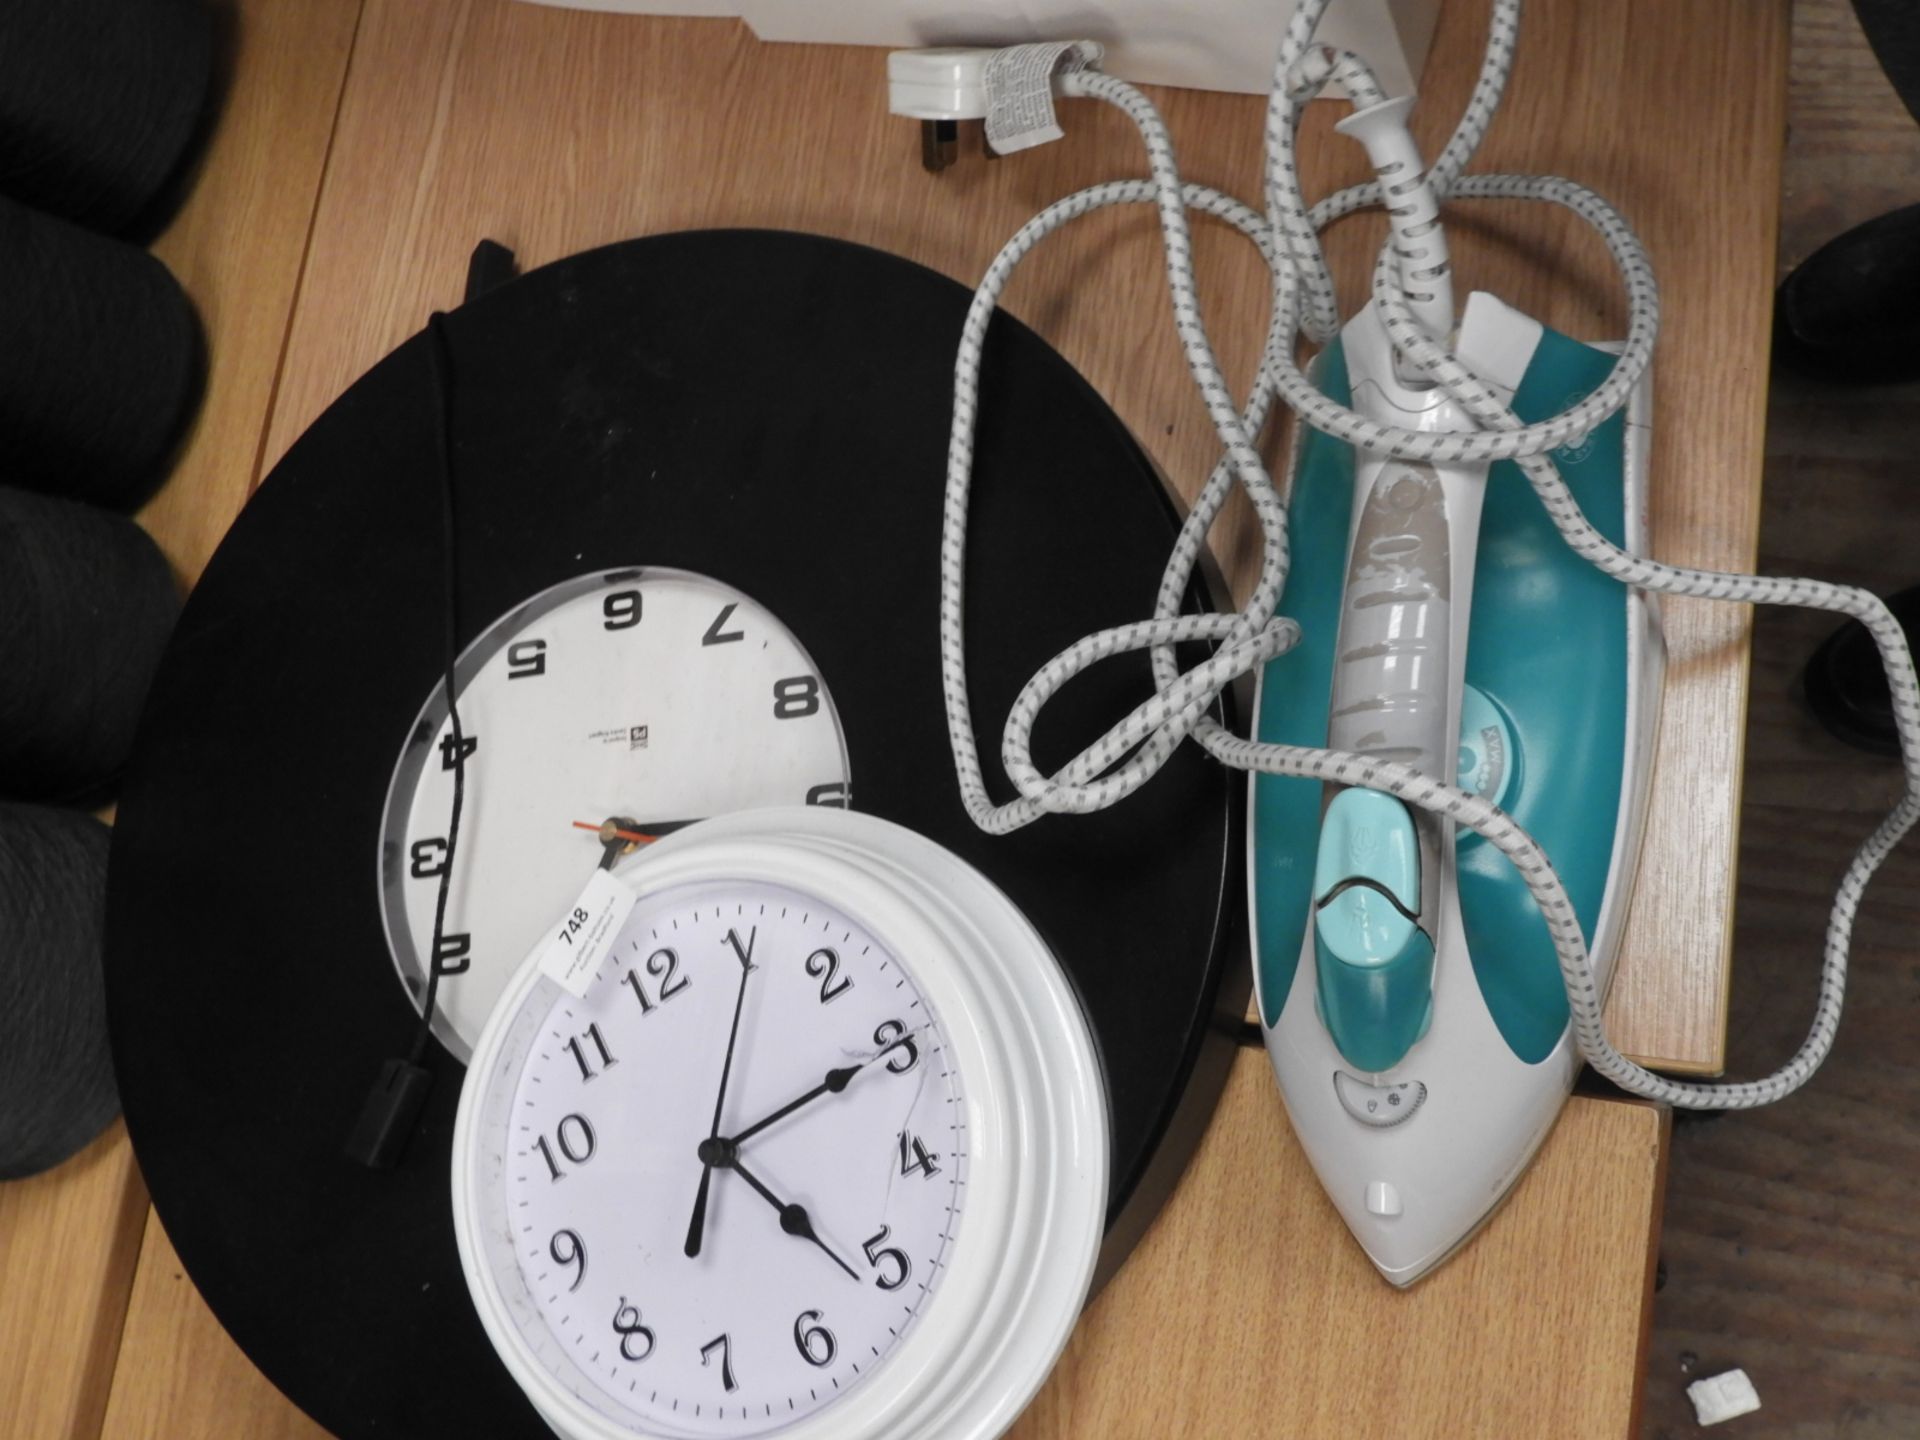 *Two Wall Clocks and a Steam Iron